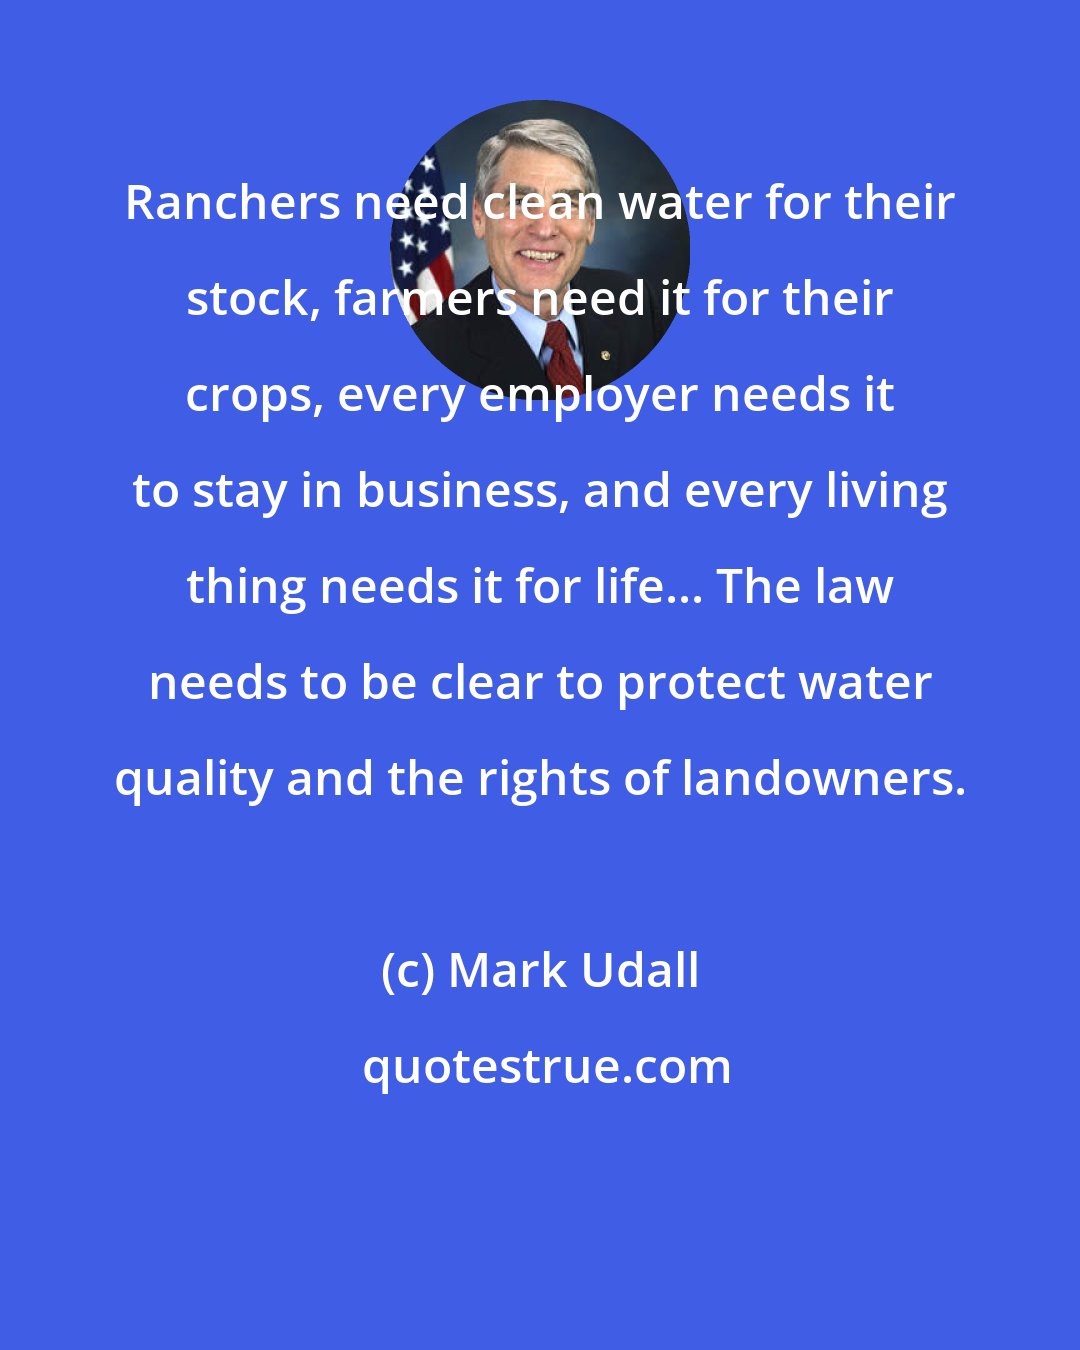 Mark Udall: Ranchers need clean water for their stock, farmers need it for their crops, every employer needs it to stay in business, and every living thing needs it for life... The law needs to be clear to protect water quality and the rights of landowners.